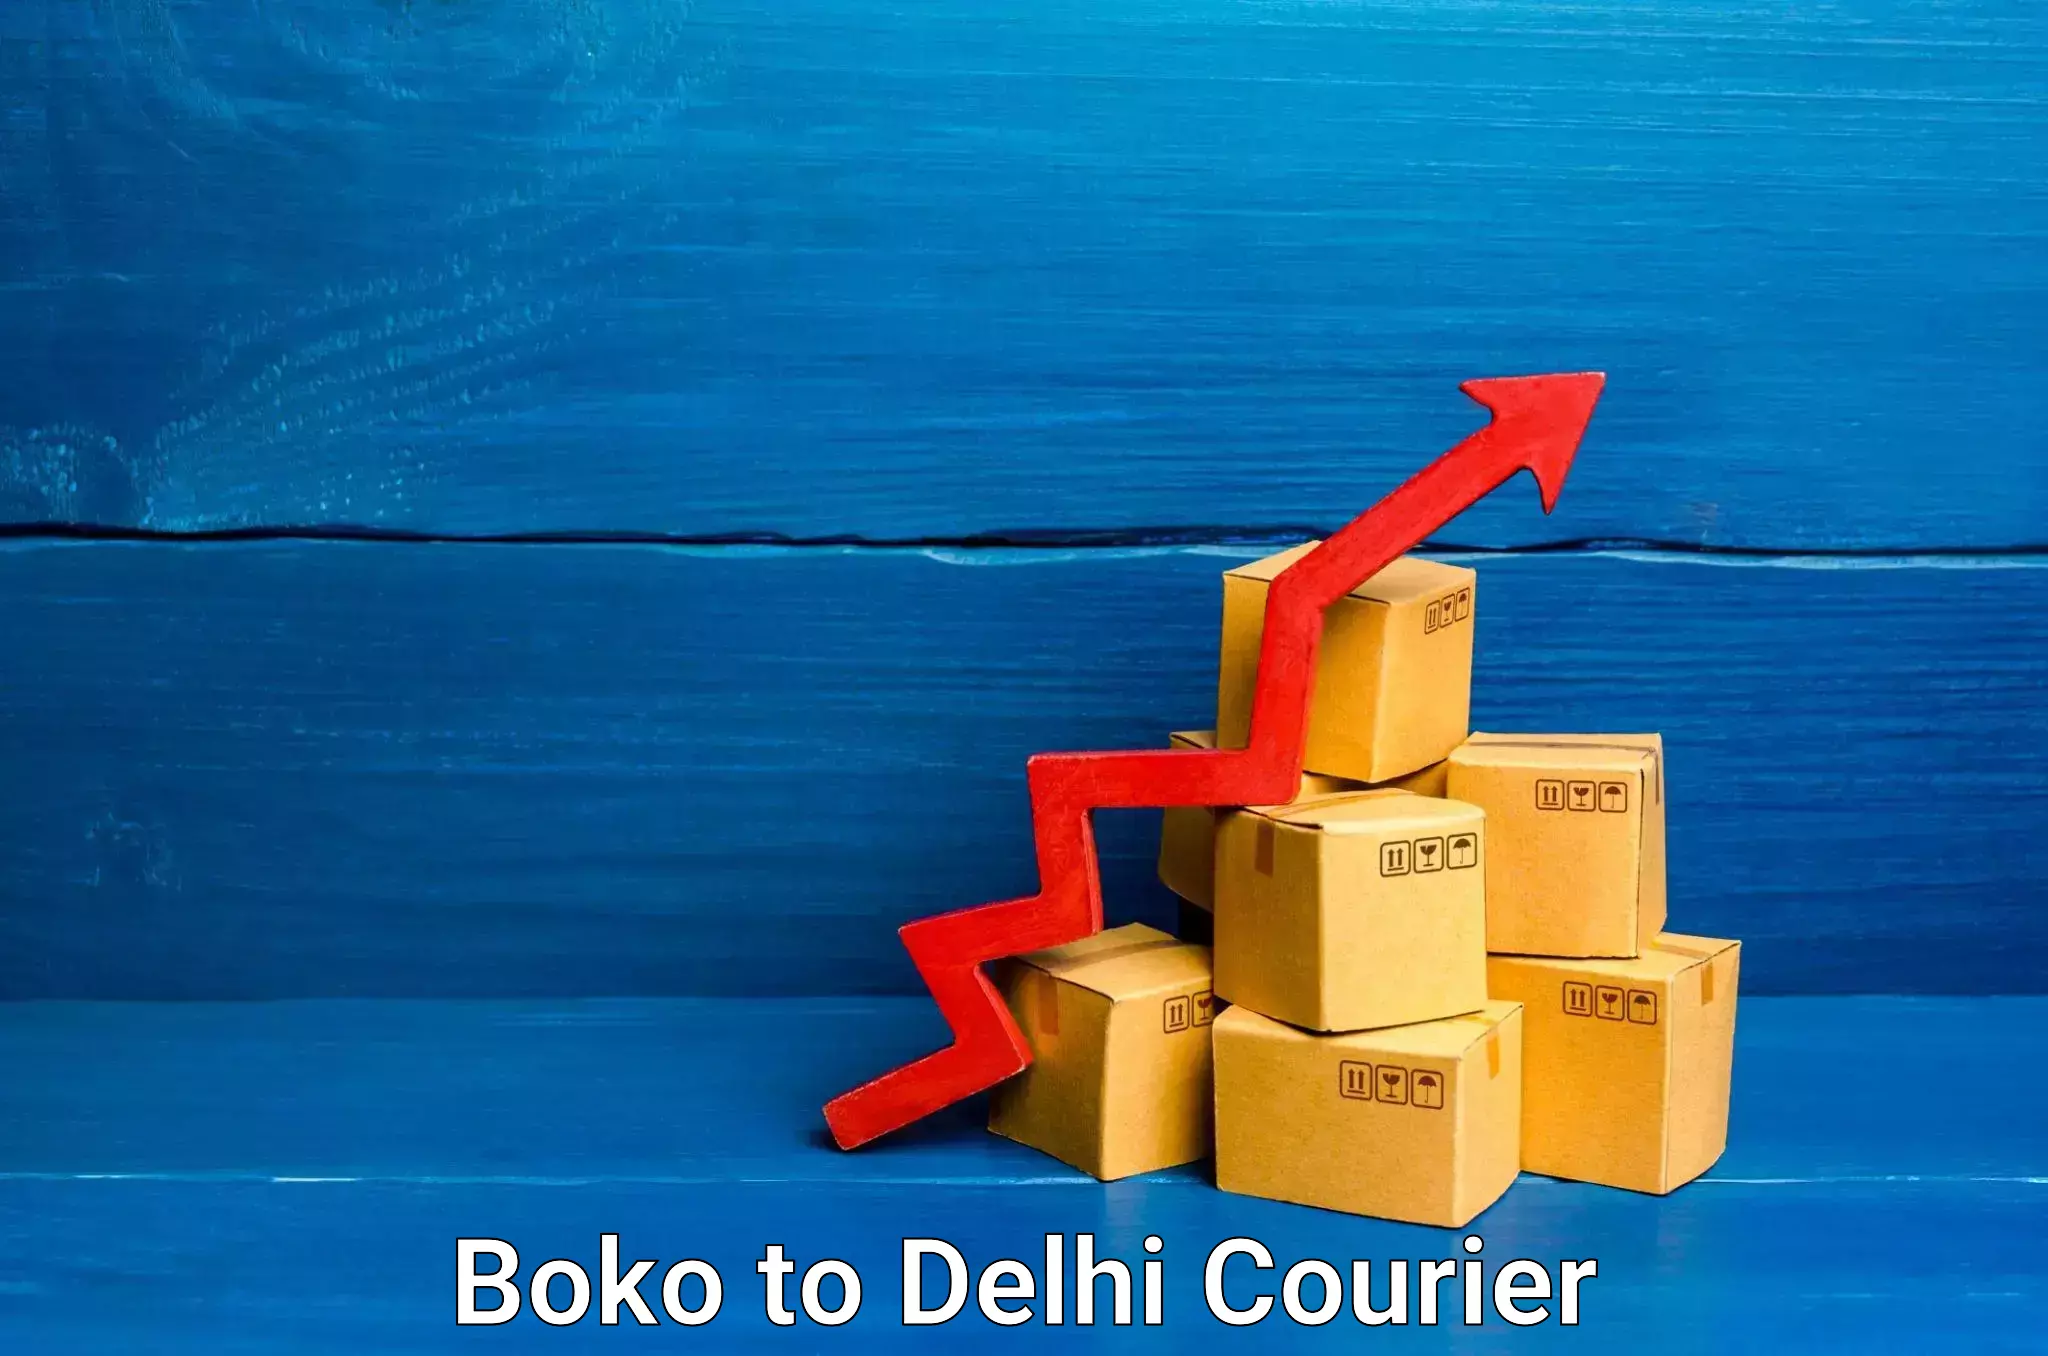 Automated shipping Boko to Lodhi Road